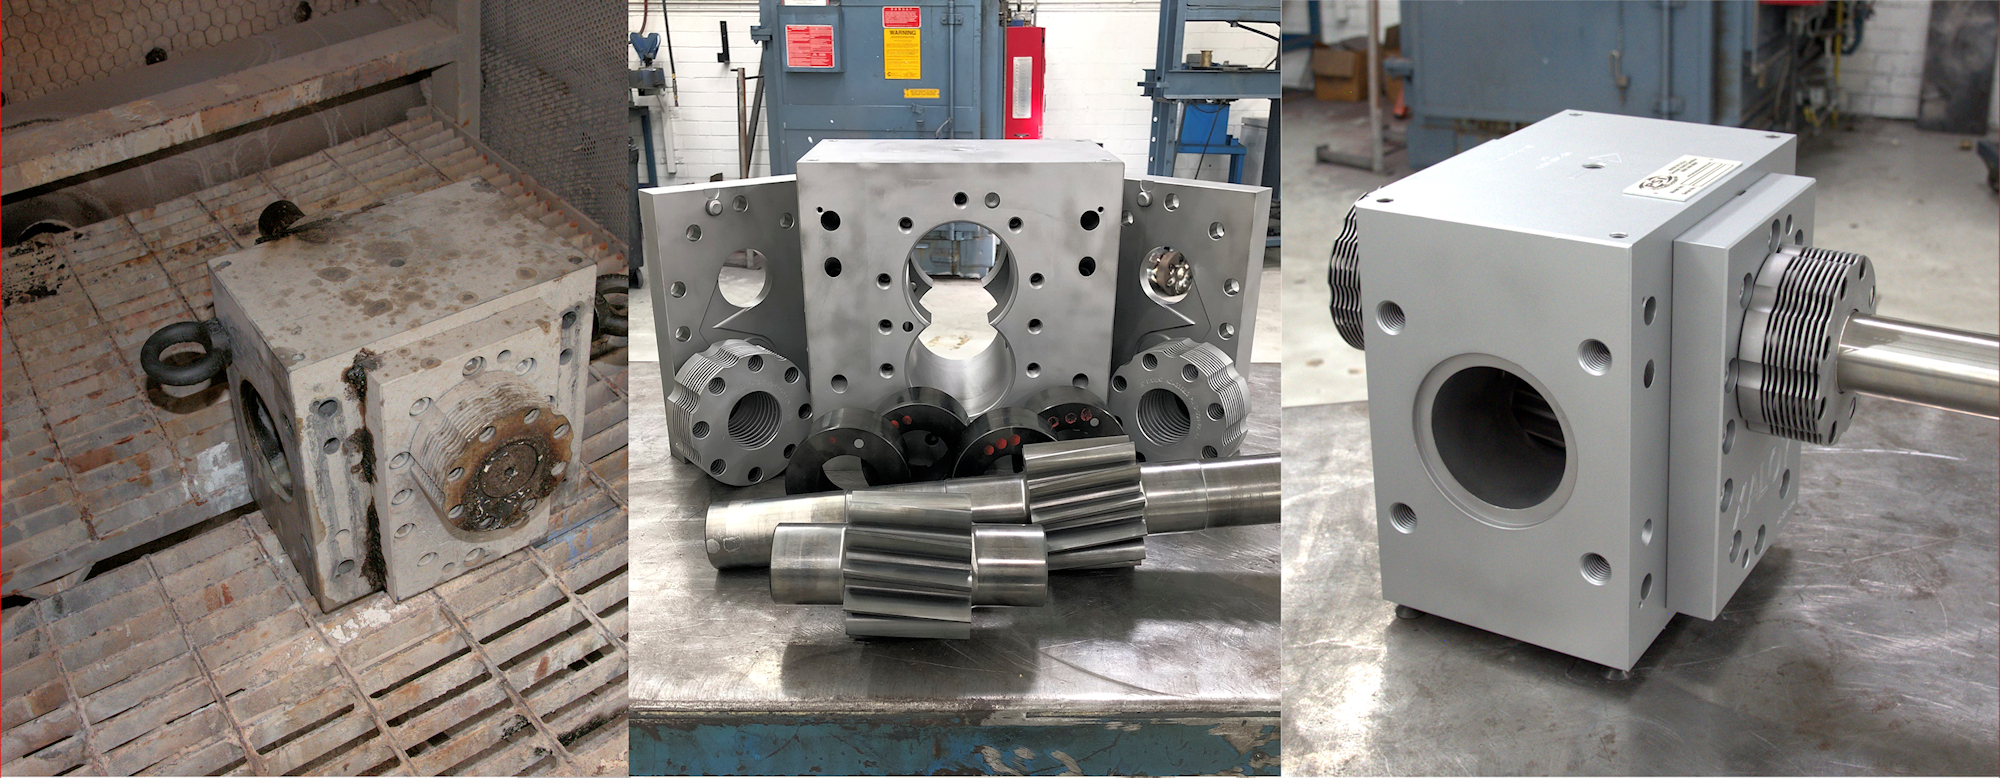 Polymer Extrusion Gear Pump Rebuild and Repair